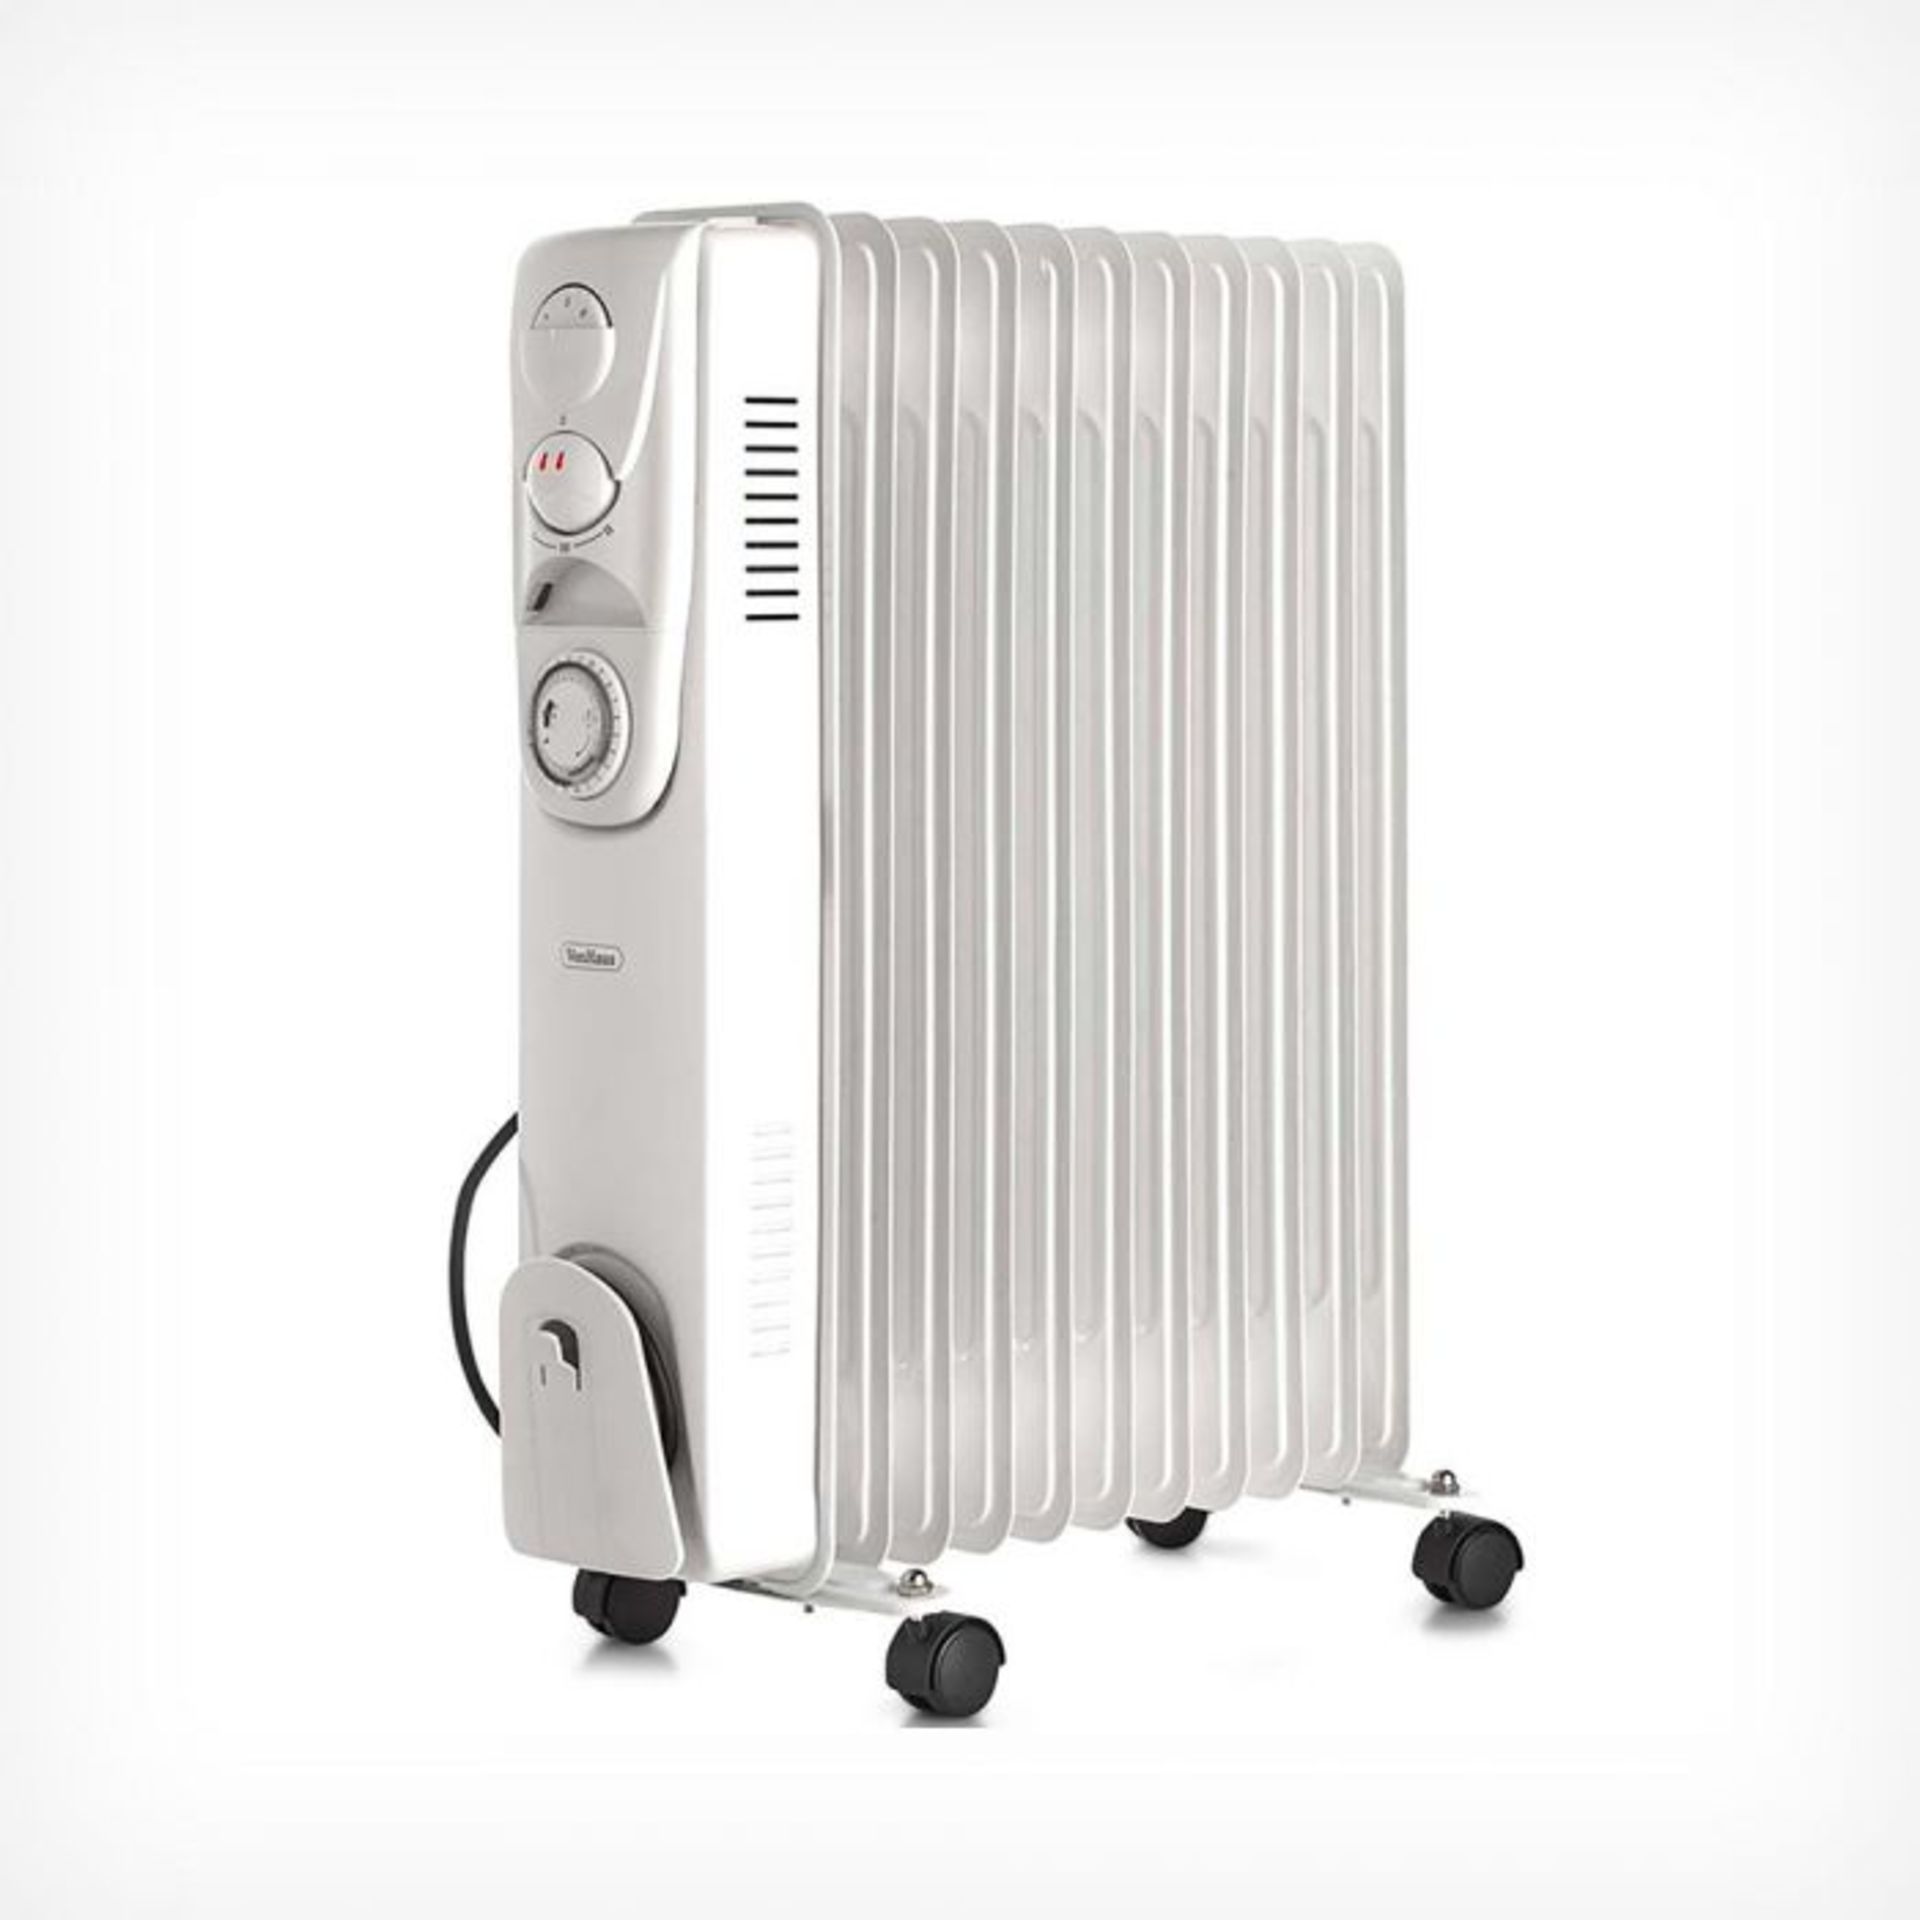 (T340) 11 Fin 2500W Oil Filled Radiator - White Suitable for areas up to 28 square metres 3 p... - Image 2 of 4